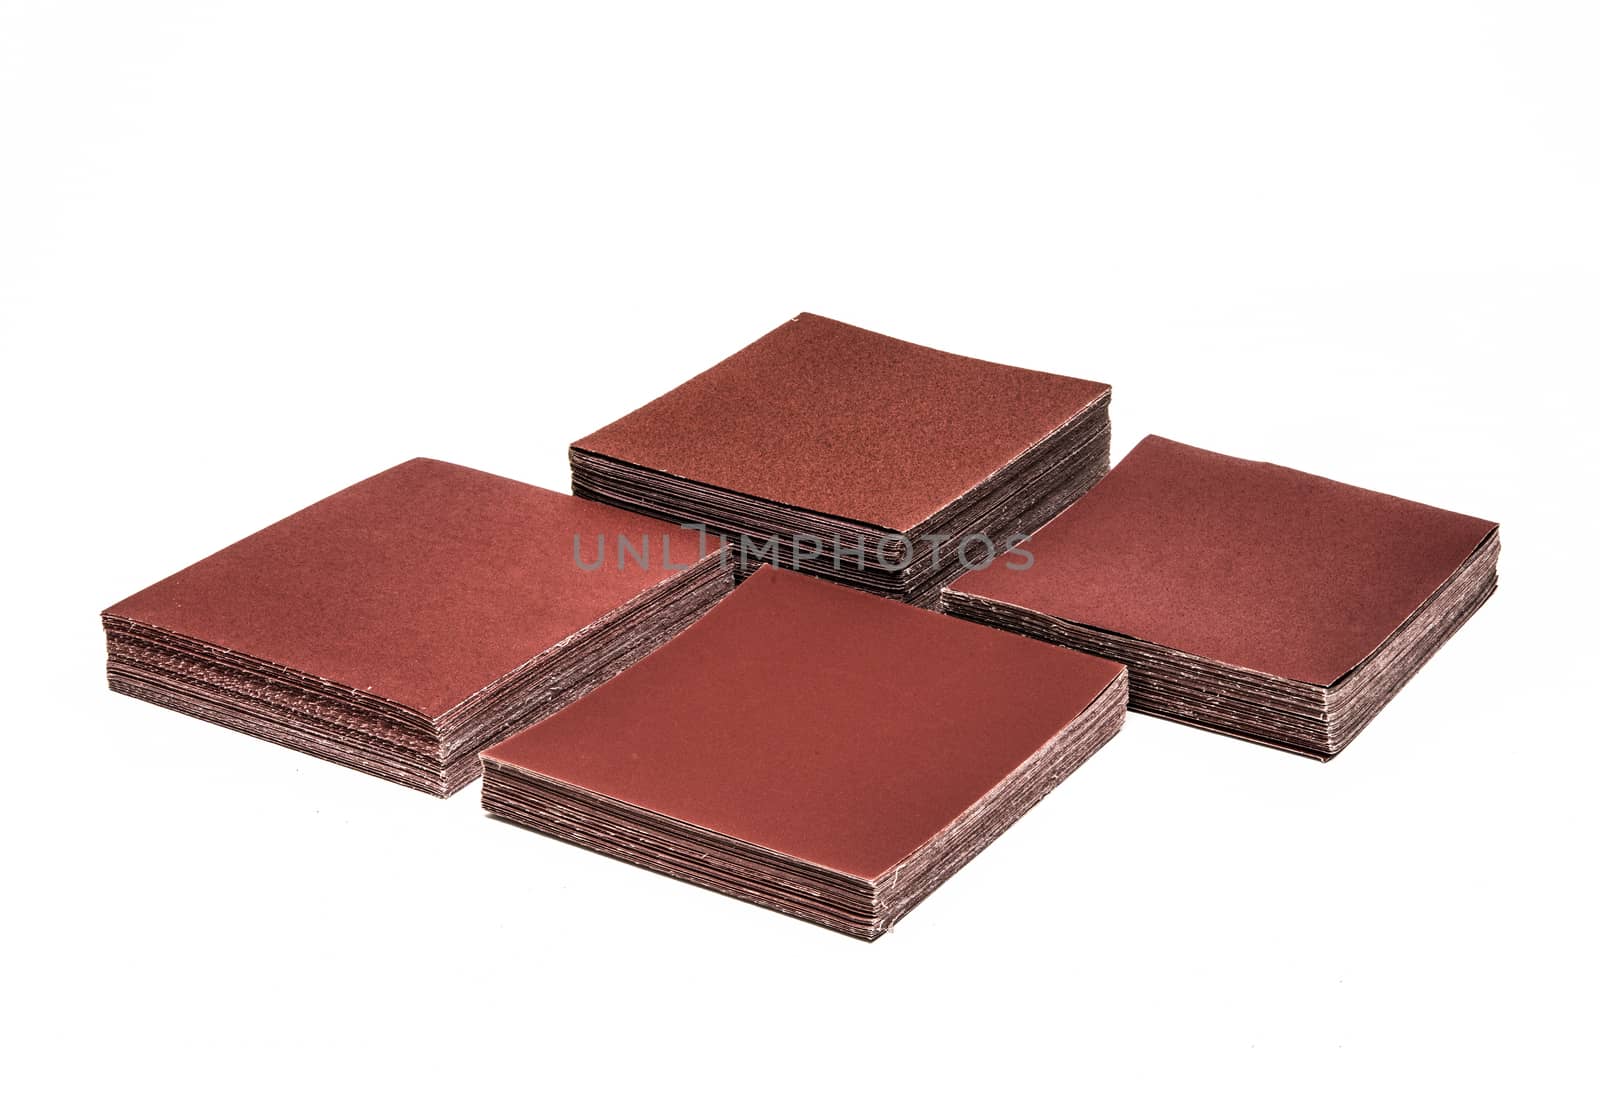 4 Sets of sand papers on white background